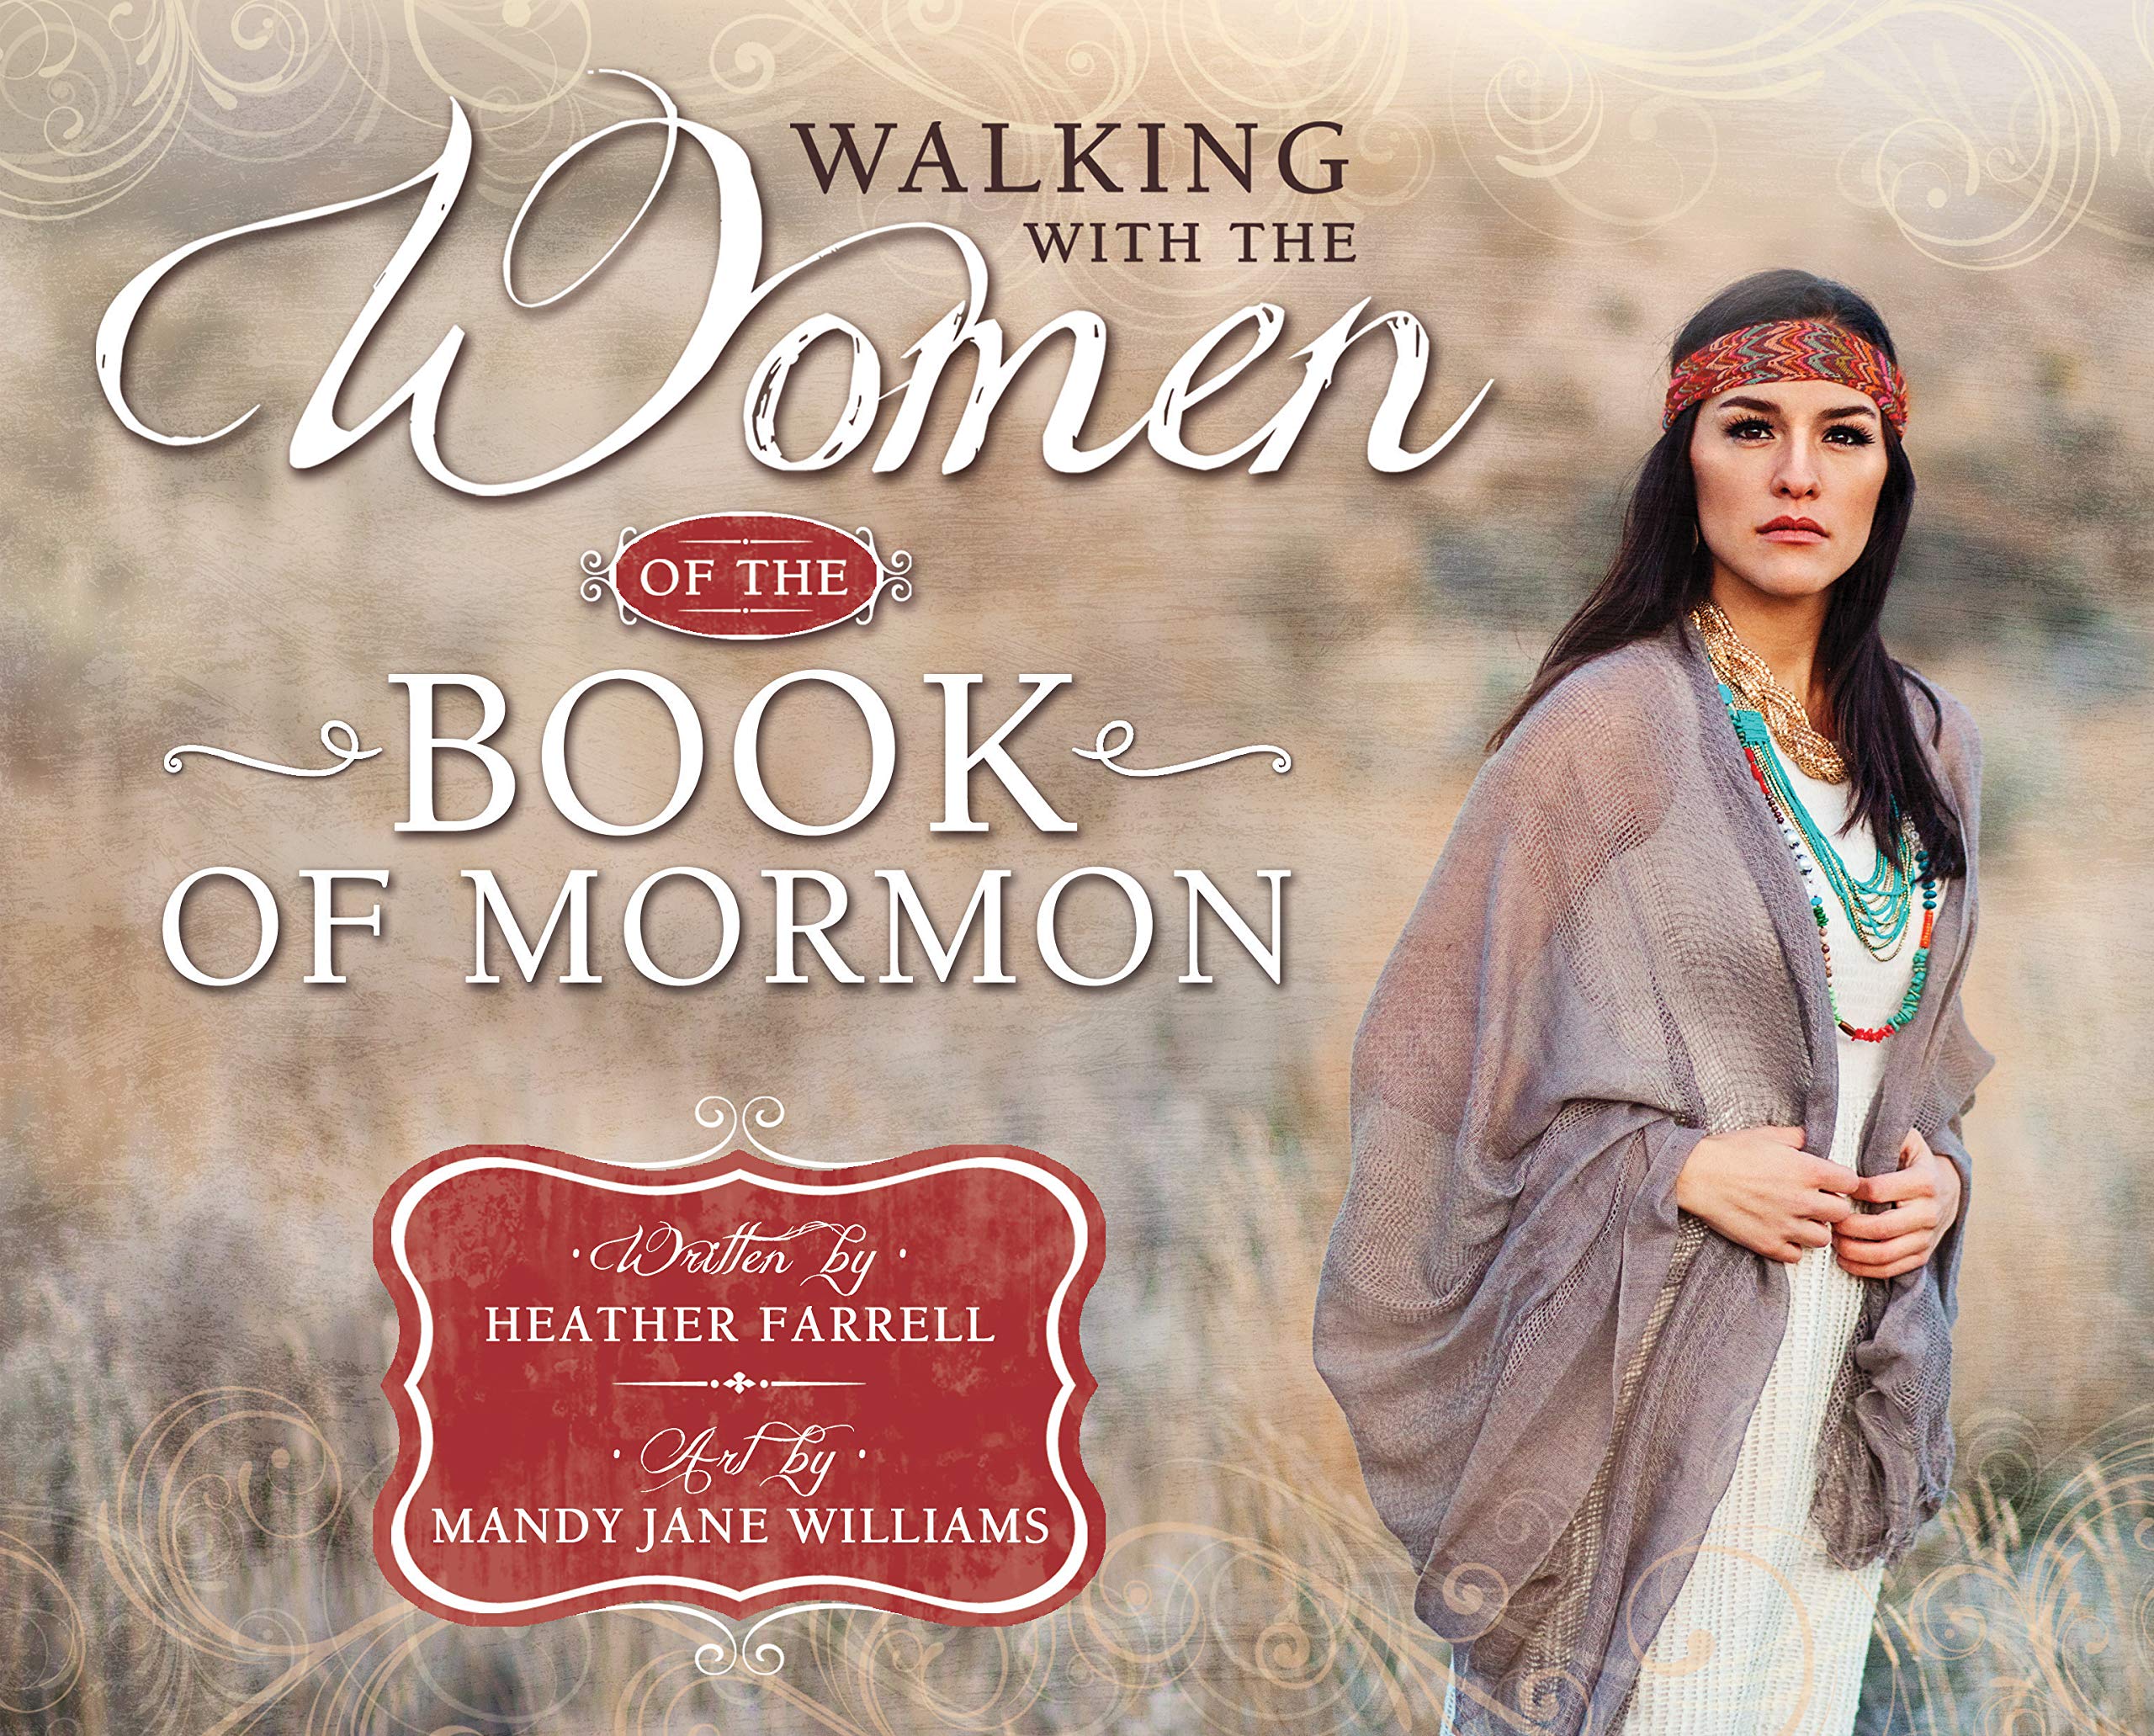 Walking With the Women of the Book of Mormon